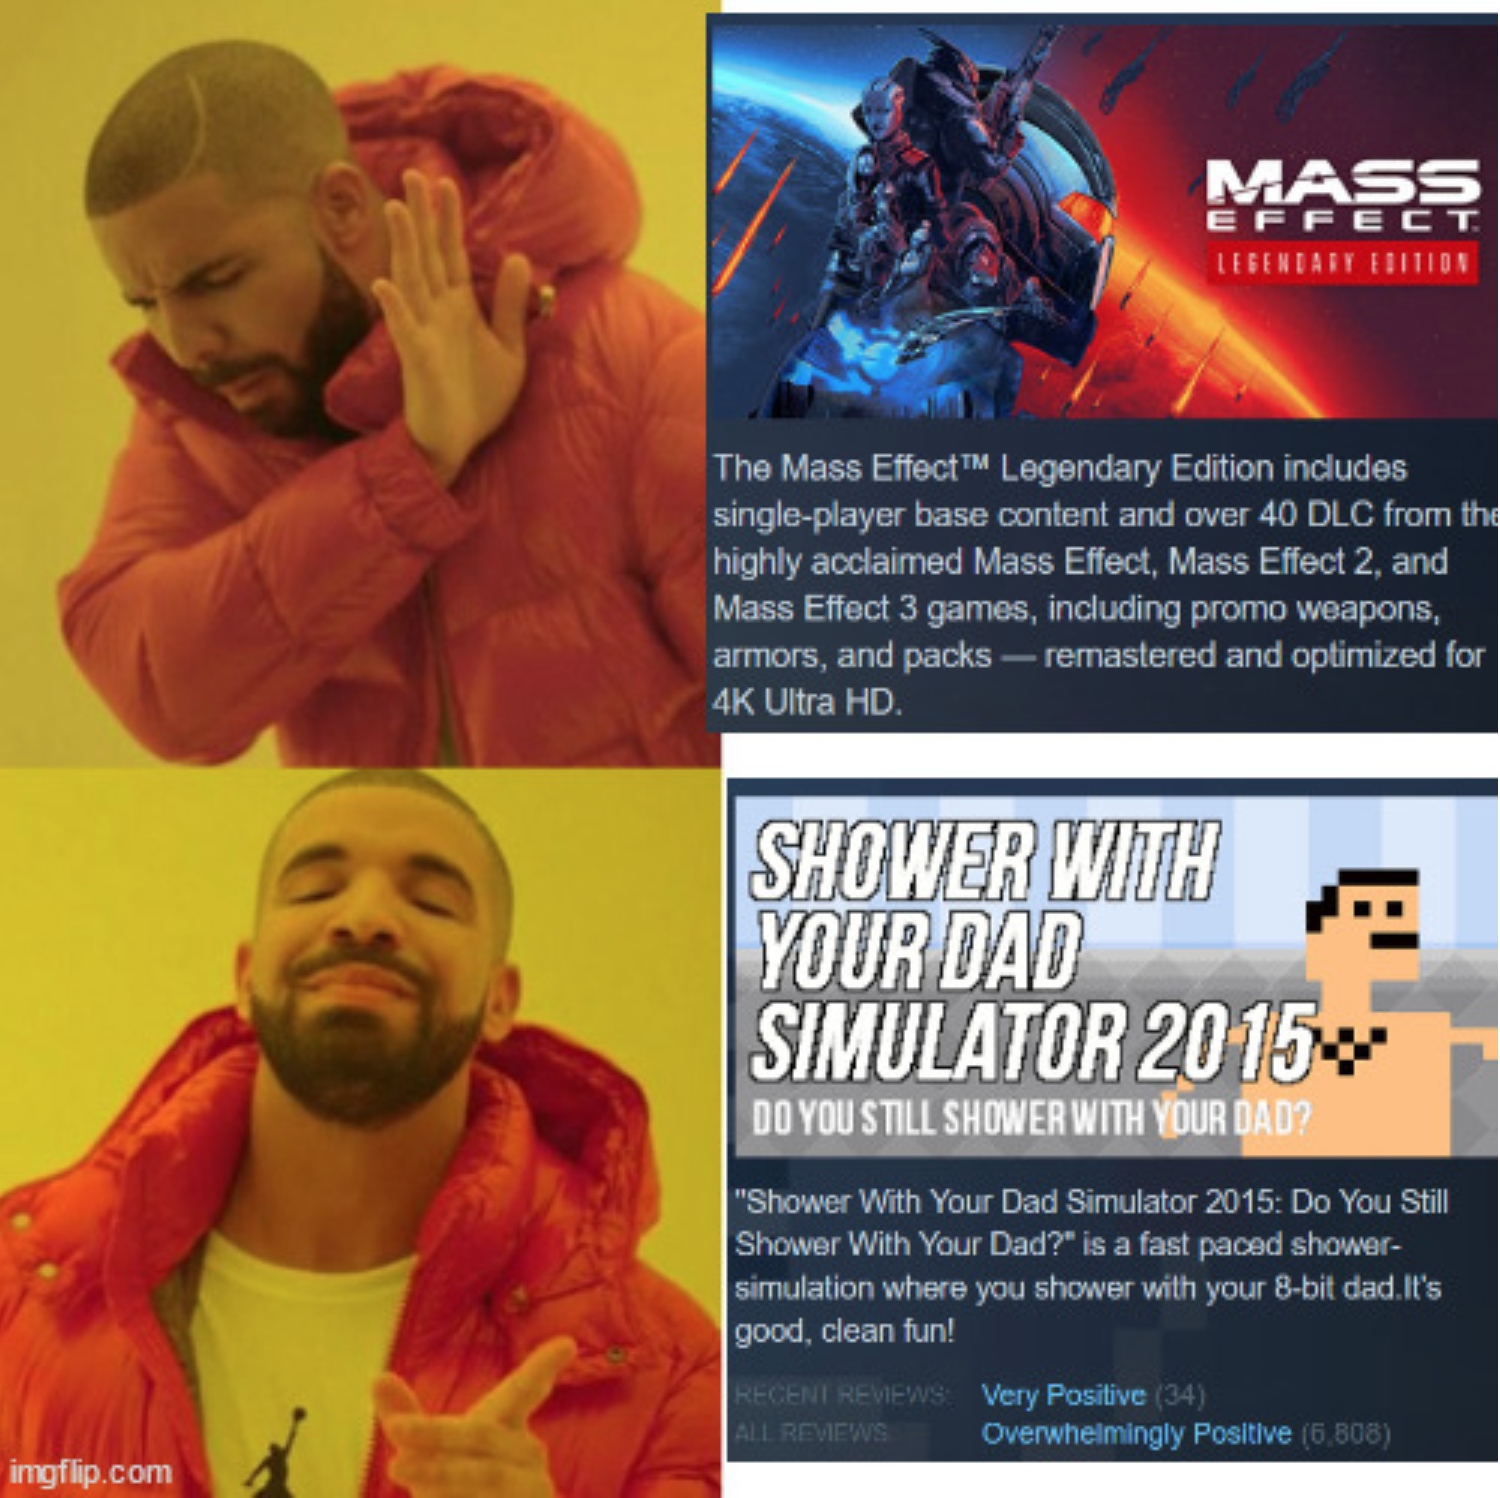 funny gaming memes - blank drake meme - Mass Effect The Mass Effect Legendary Edition includes singleplayer base content and over 40 Dlc from the highly acclaimed Mass Effect, Mass Effect 2, and Mass Effect 3 games, including promo weapons, armors, and pa